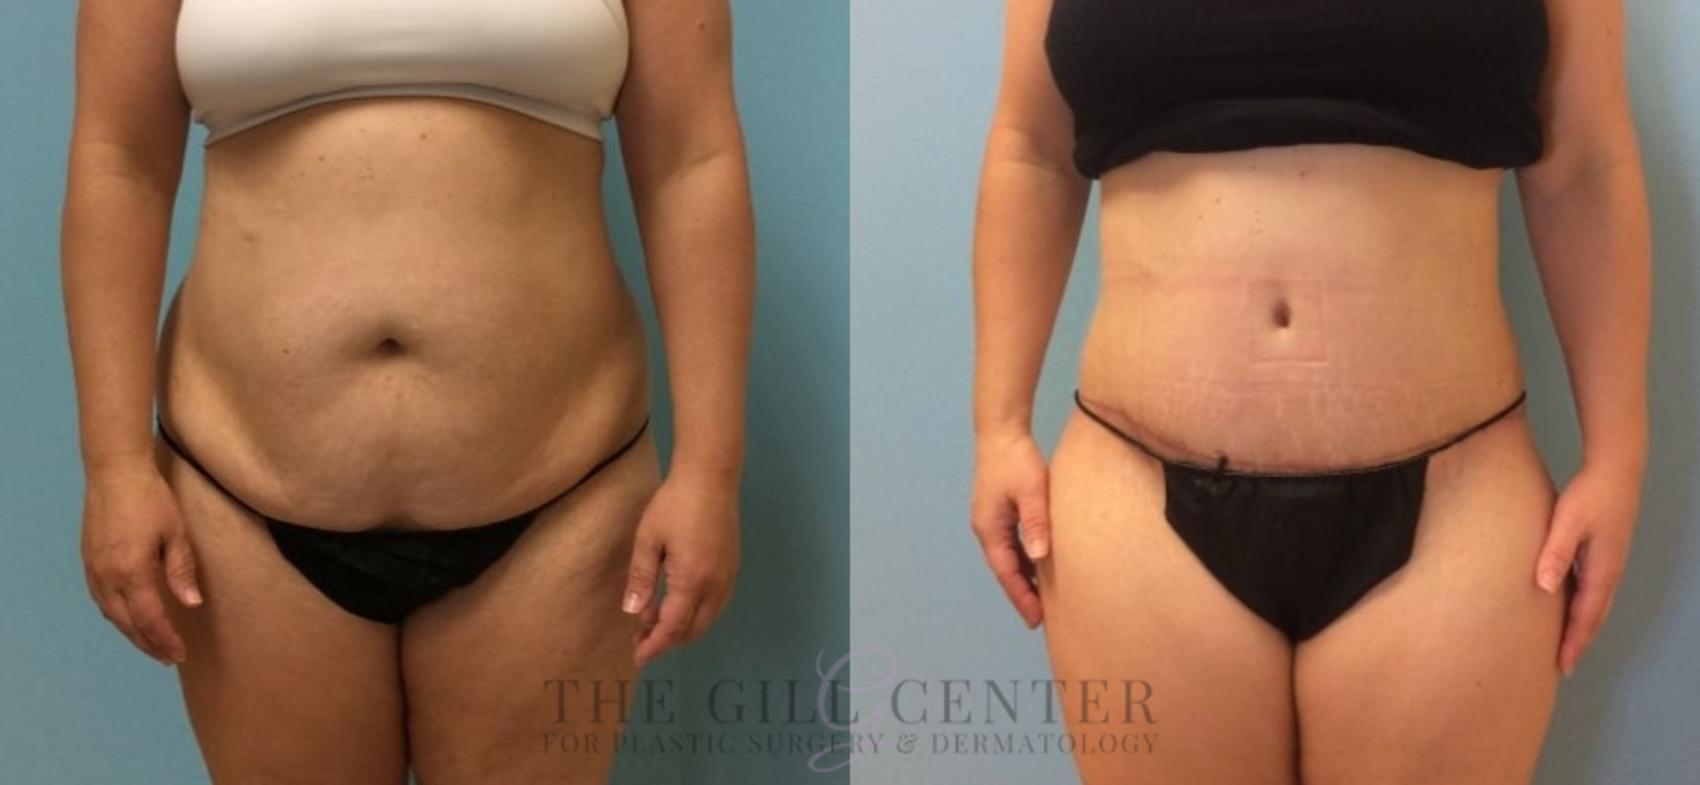 https://images.thegillcenter.com/content/images/tummy-tuck-442-front-detail.jpg